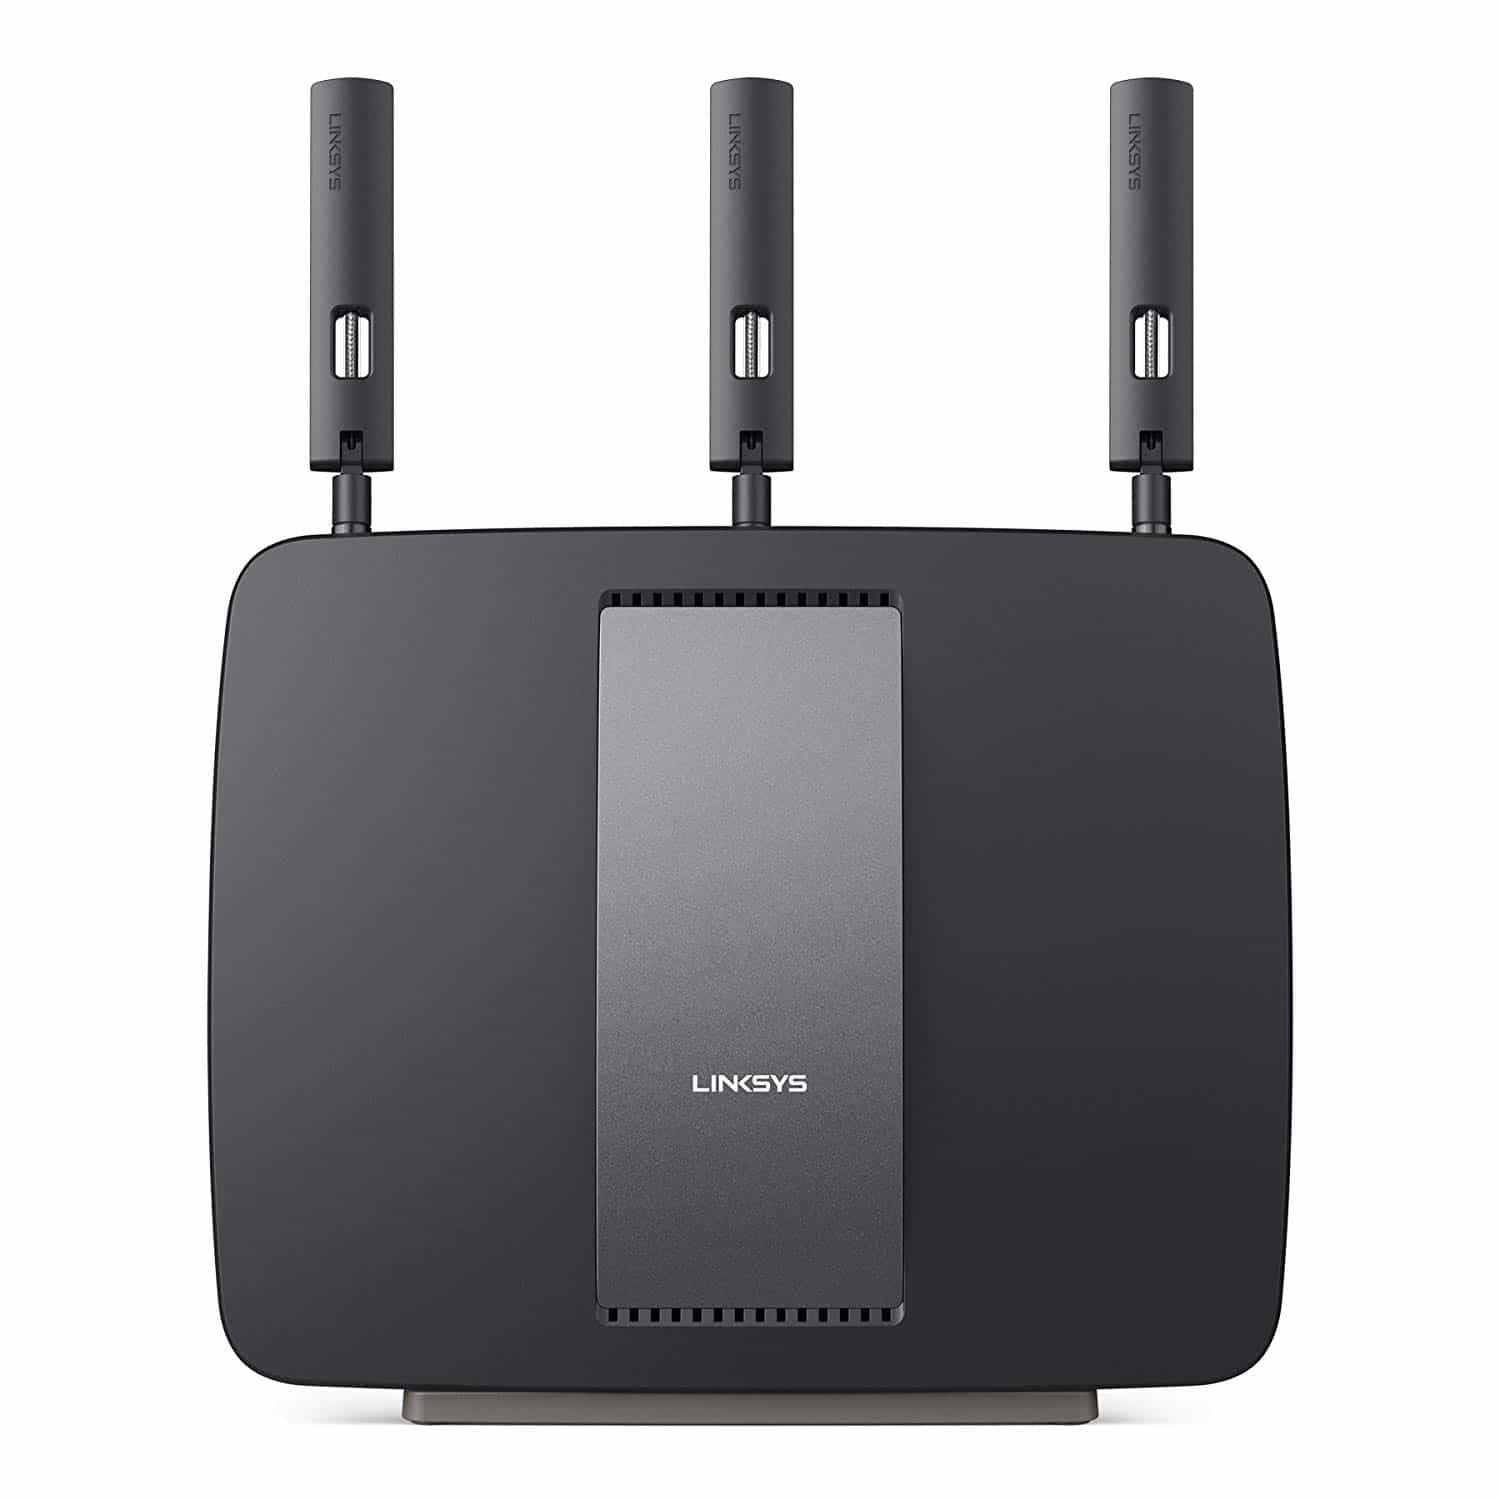 Linksys AC3200 Tri-Band Smart wifi Router